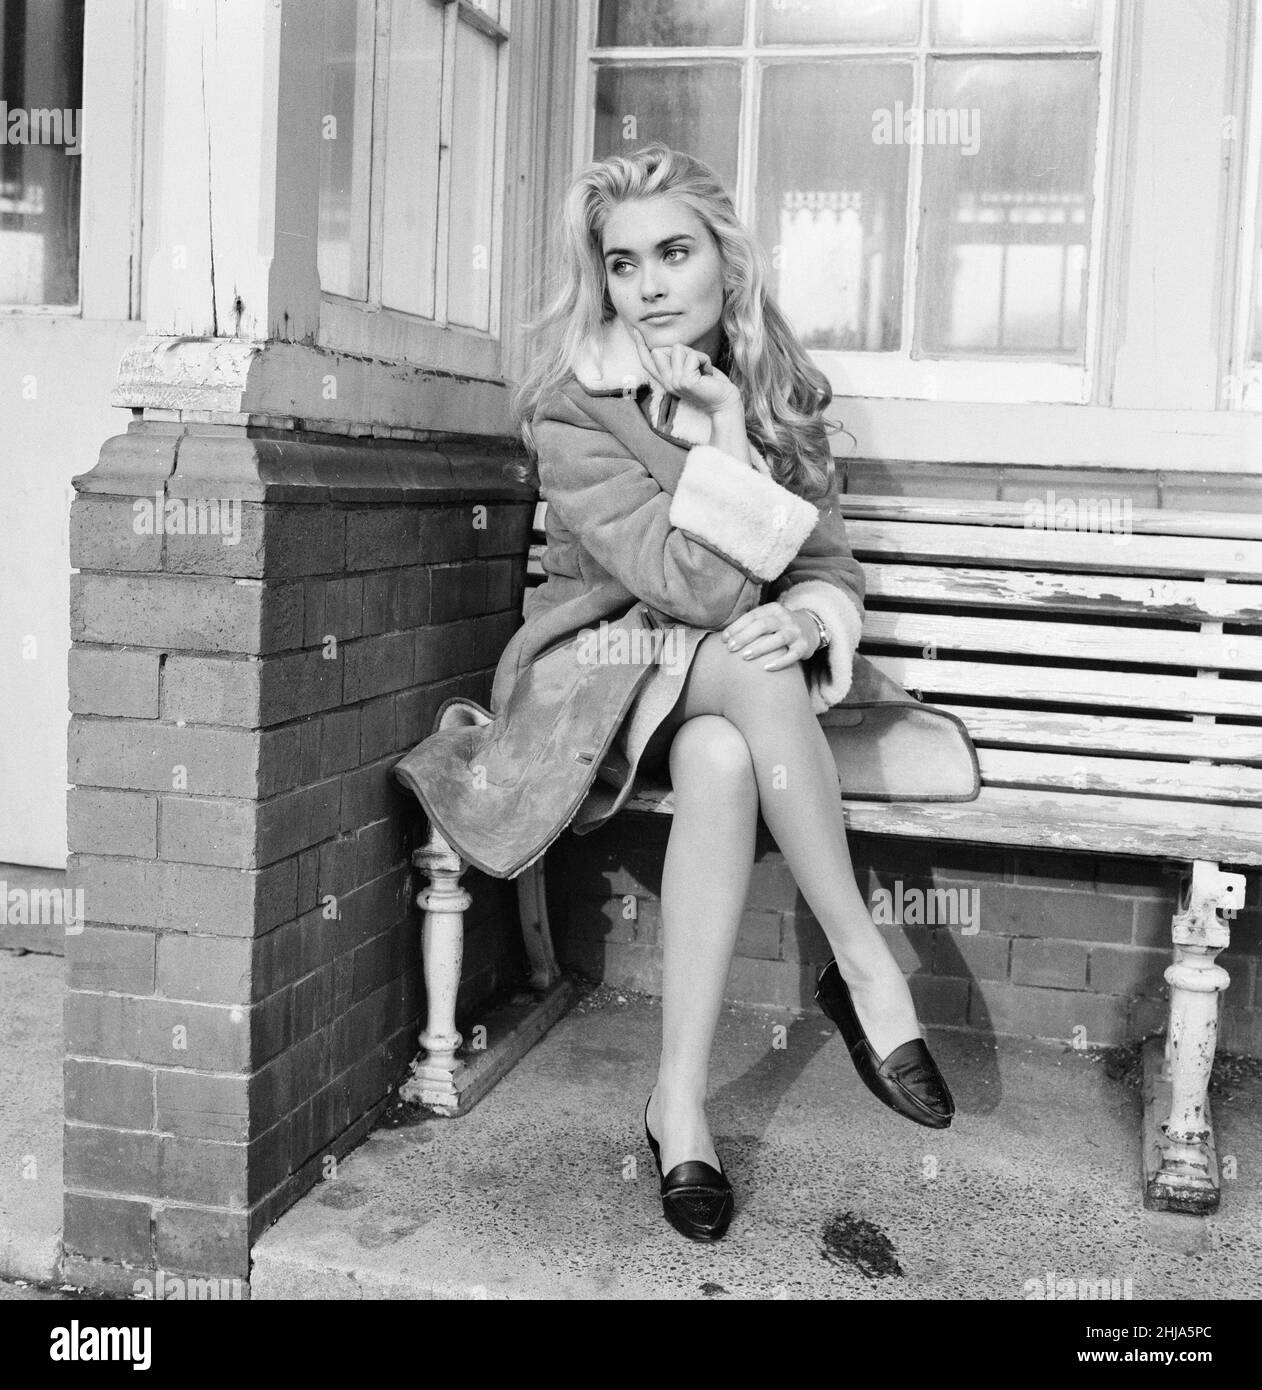 Alexandra Bastedo, 18 years old actress from Hove, Sussex, Friday 18th December 1964. Alex has recently appeared in The Count of Monte Cristo, television series as character Renée de Saint-Méran.  Pictured posing for pictures, while sitting in a bus shelter in Hove. Stock Photo